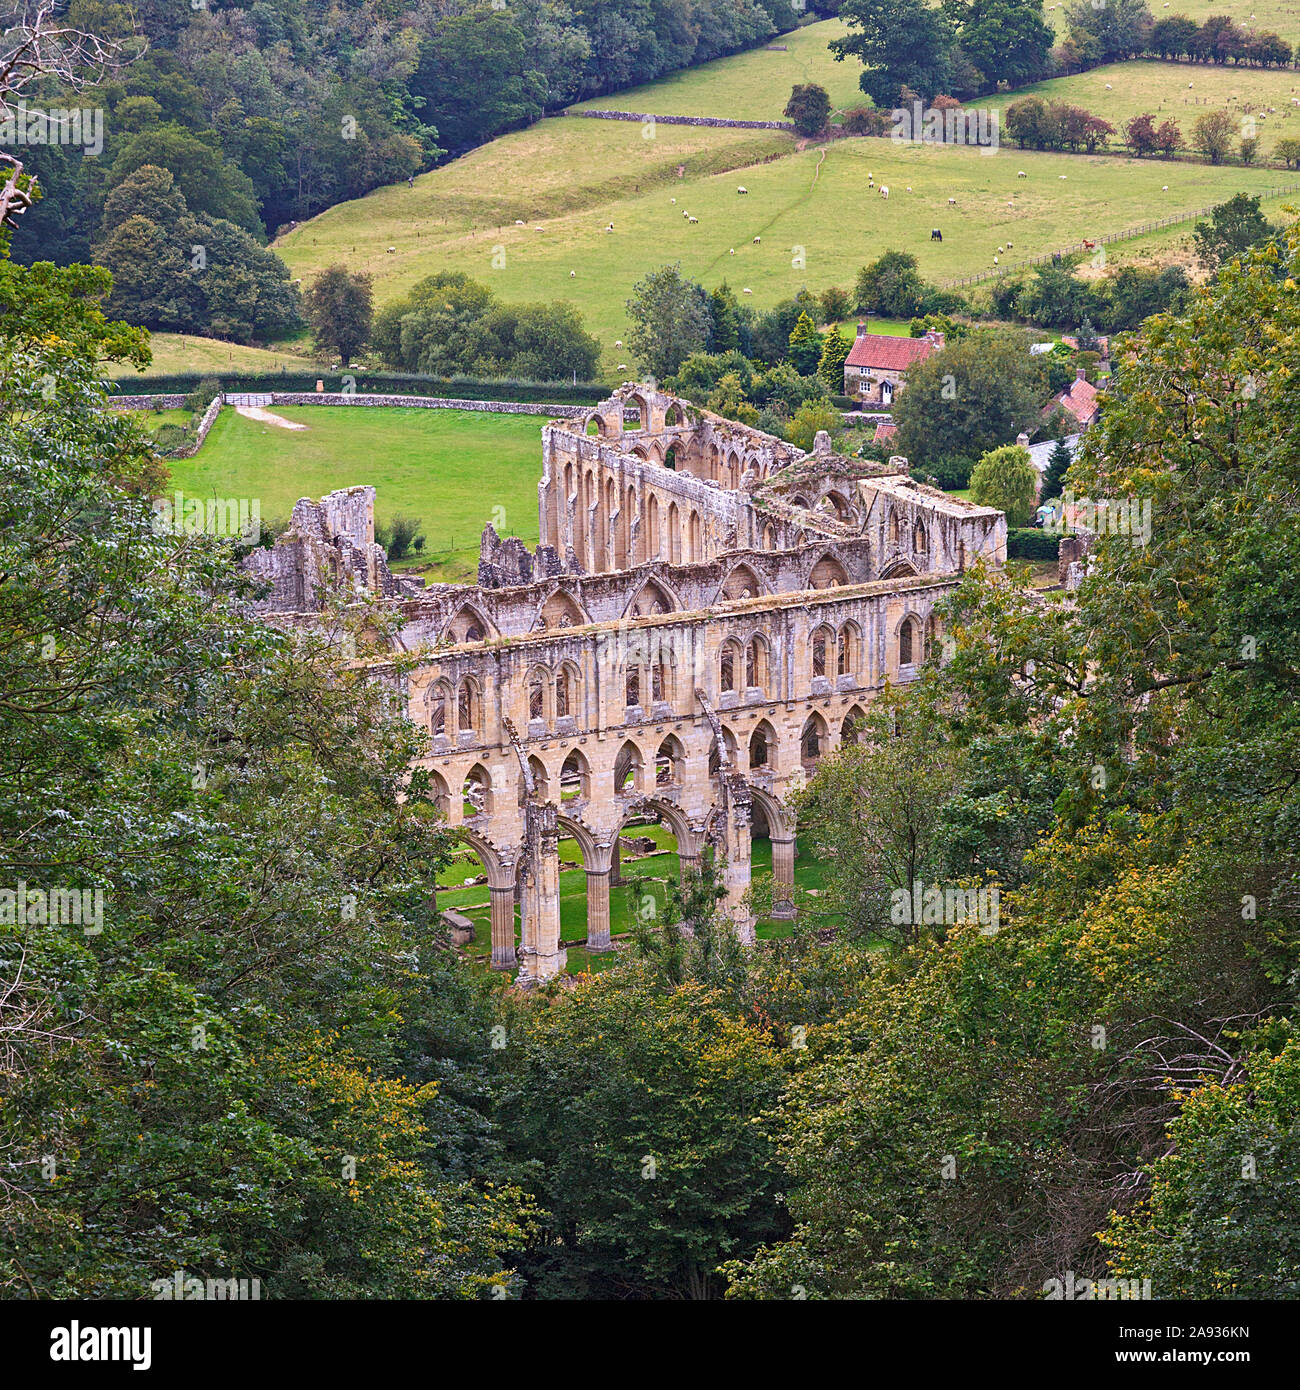 Rievaulx Abbey ruins viewed from Rievaulx Terrace, Ryedale, North Yorkshire Moors, UK Stock Photo